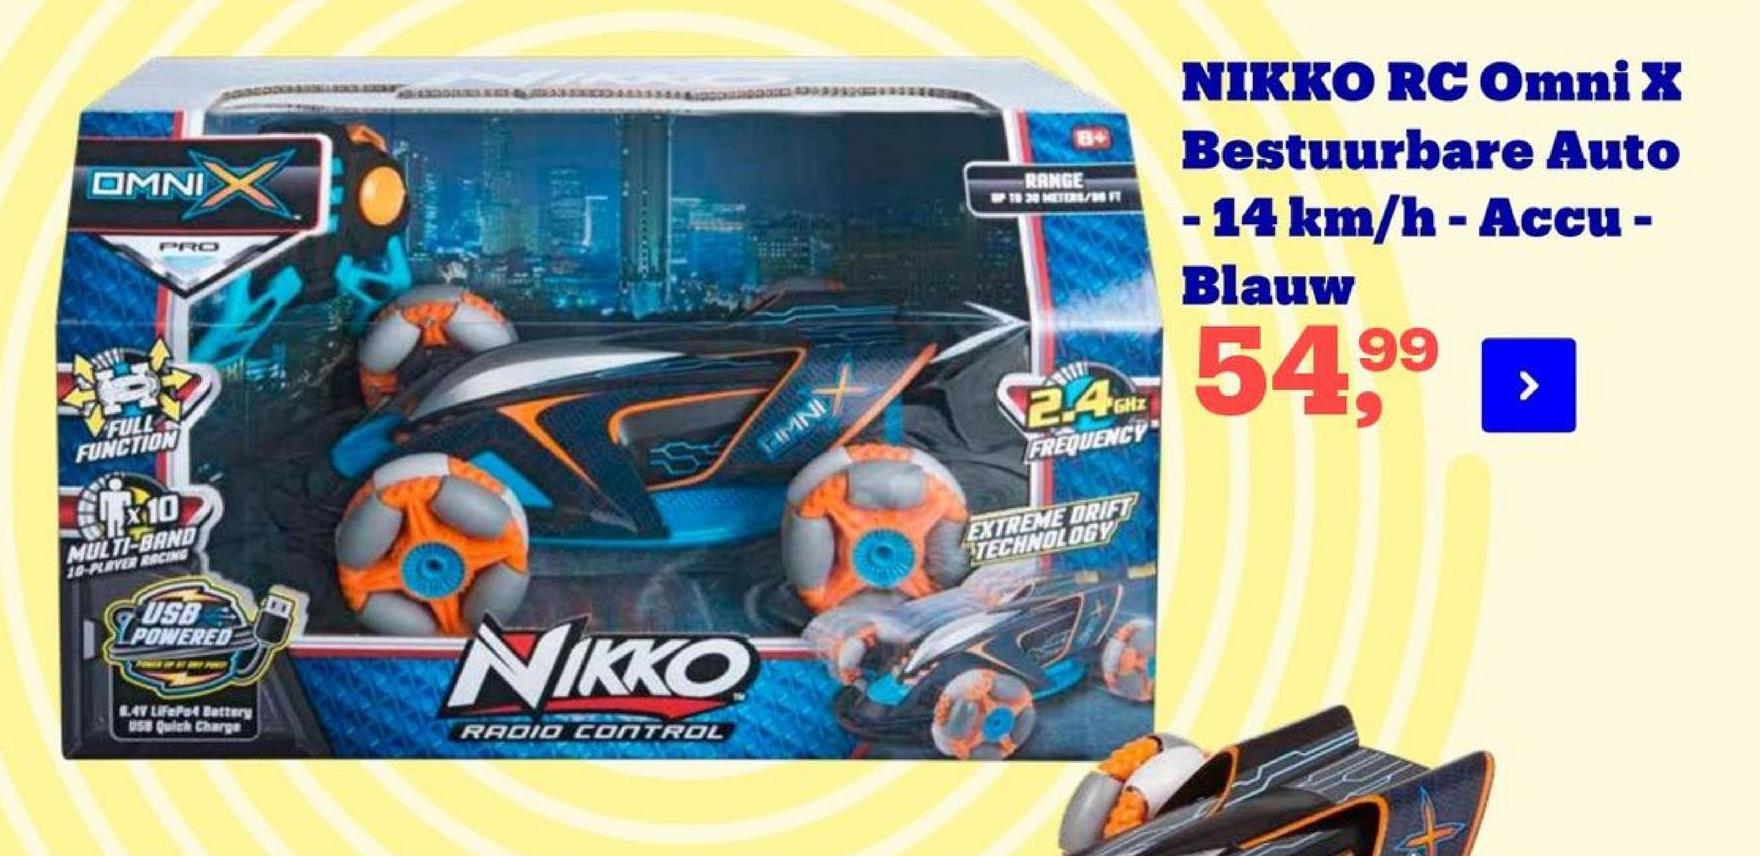 OMNI
RANGE
20 METS/B
NIKKO RC Omni X
Bestuurbare Auto
- 14 km/h - Accu -
Blauw
PRO
11
5499
>
2.4GHz
FULL
FUNCTION
KAMNI
FREQUENCY
10
EXTREME DRIFT
TECHNOLOGY
MULTI-BAND
10-PLIVER BRCING
USB
I POWERED
NIKKO
24V LiFePet Battery
USB Quick Charge
RADIO CONTROL
